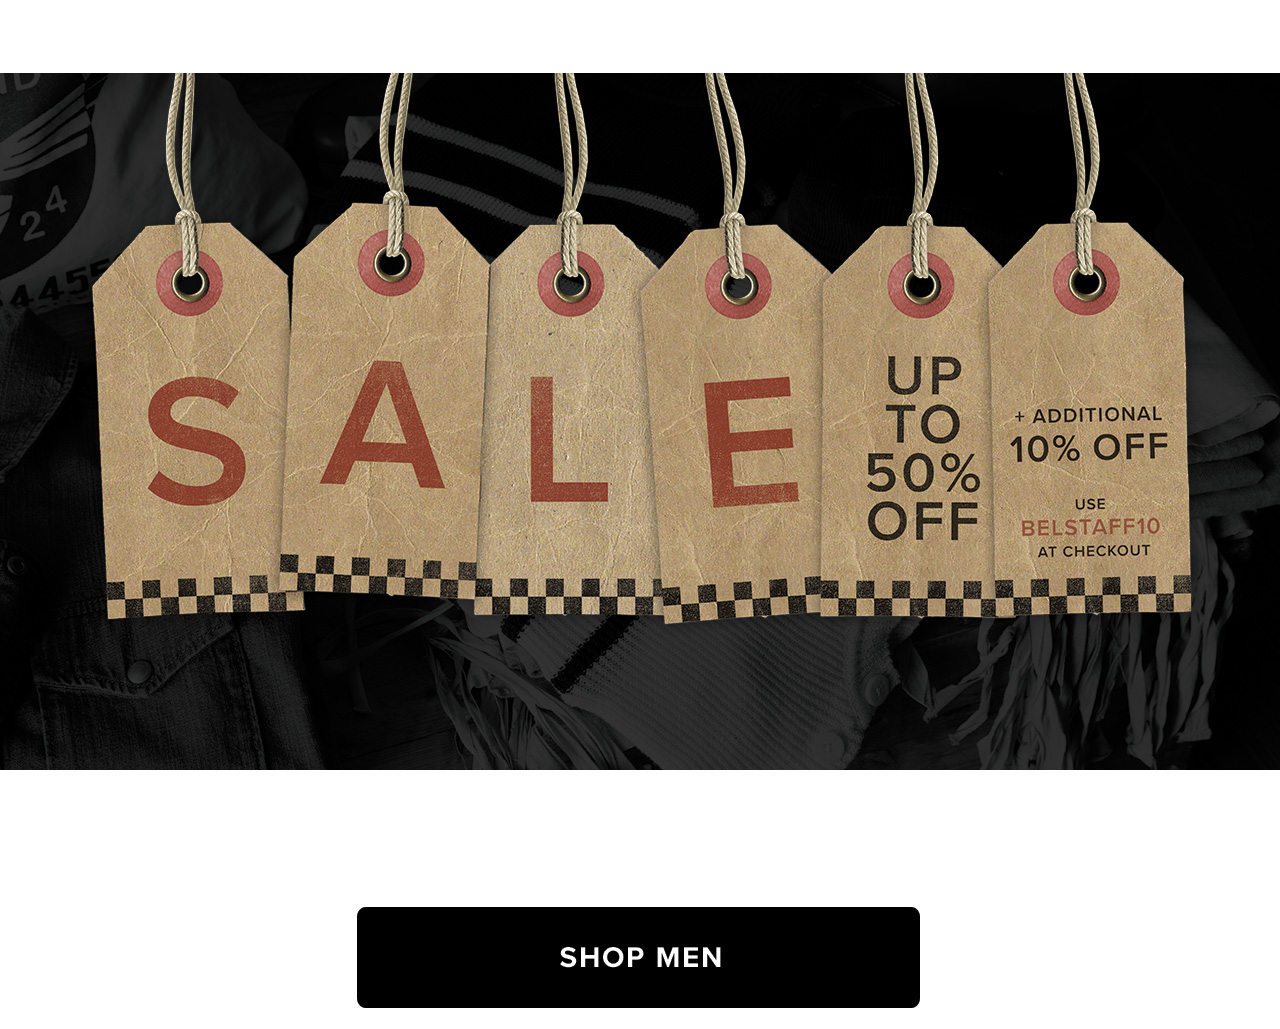 Get an extra 10% off sale with code BELSTAFF10